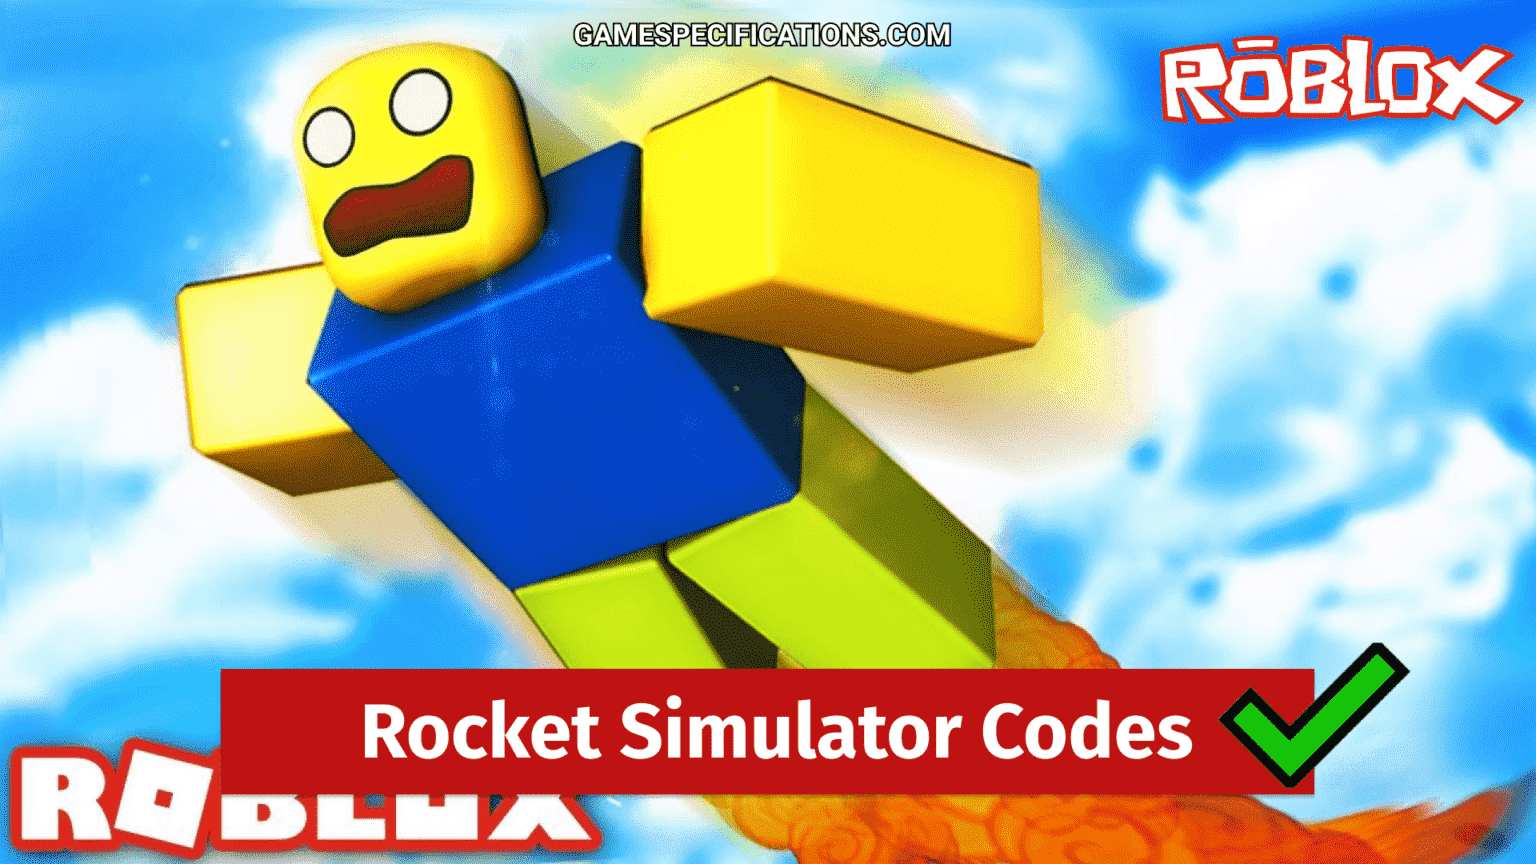 roblox-rocket-simulator-codes-august-2022-game-specifications